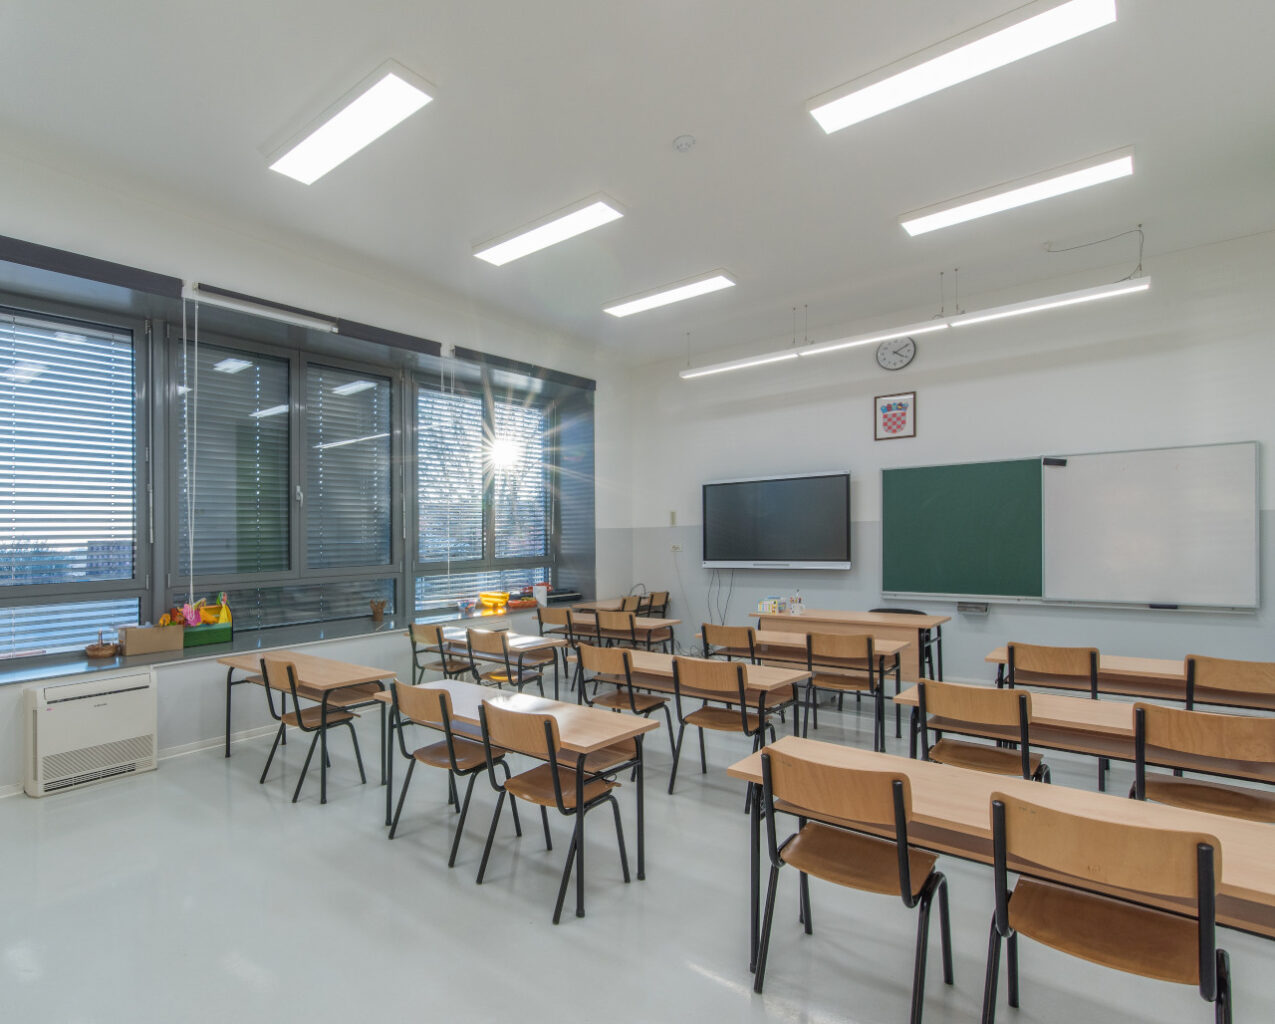 Suspended Intab luminaire in classroom